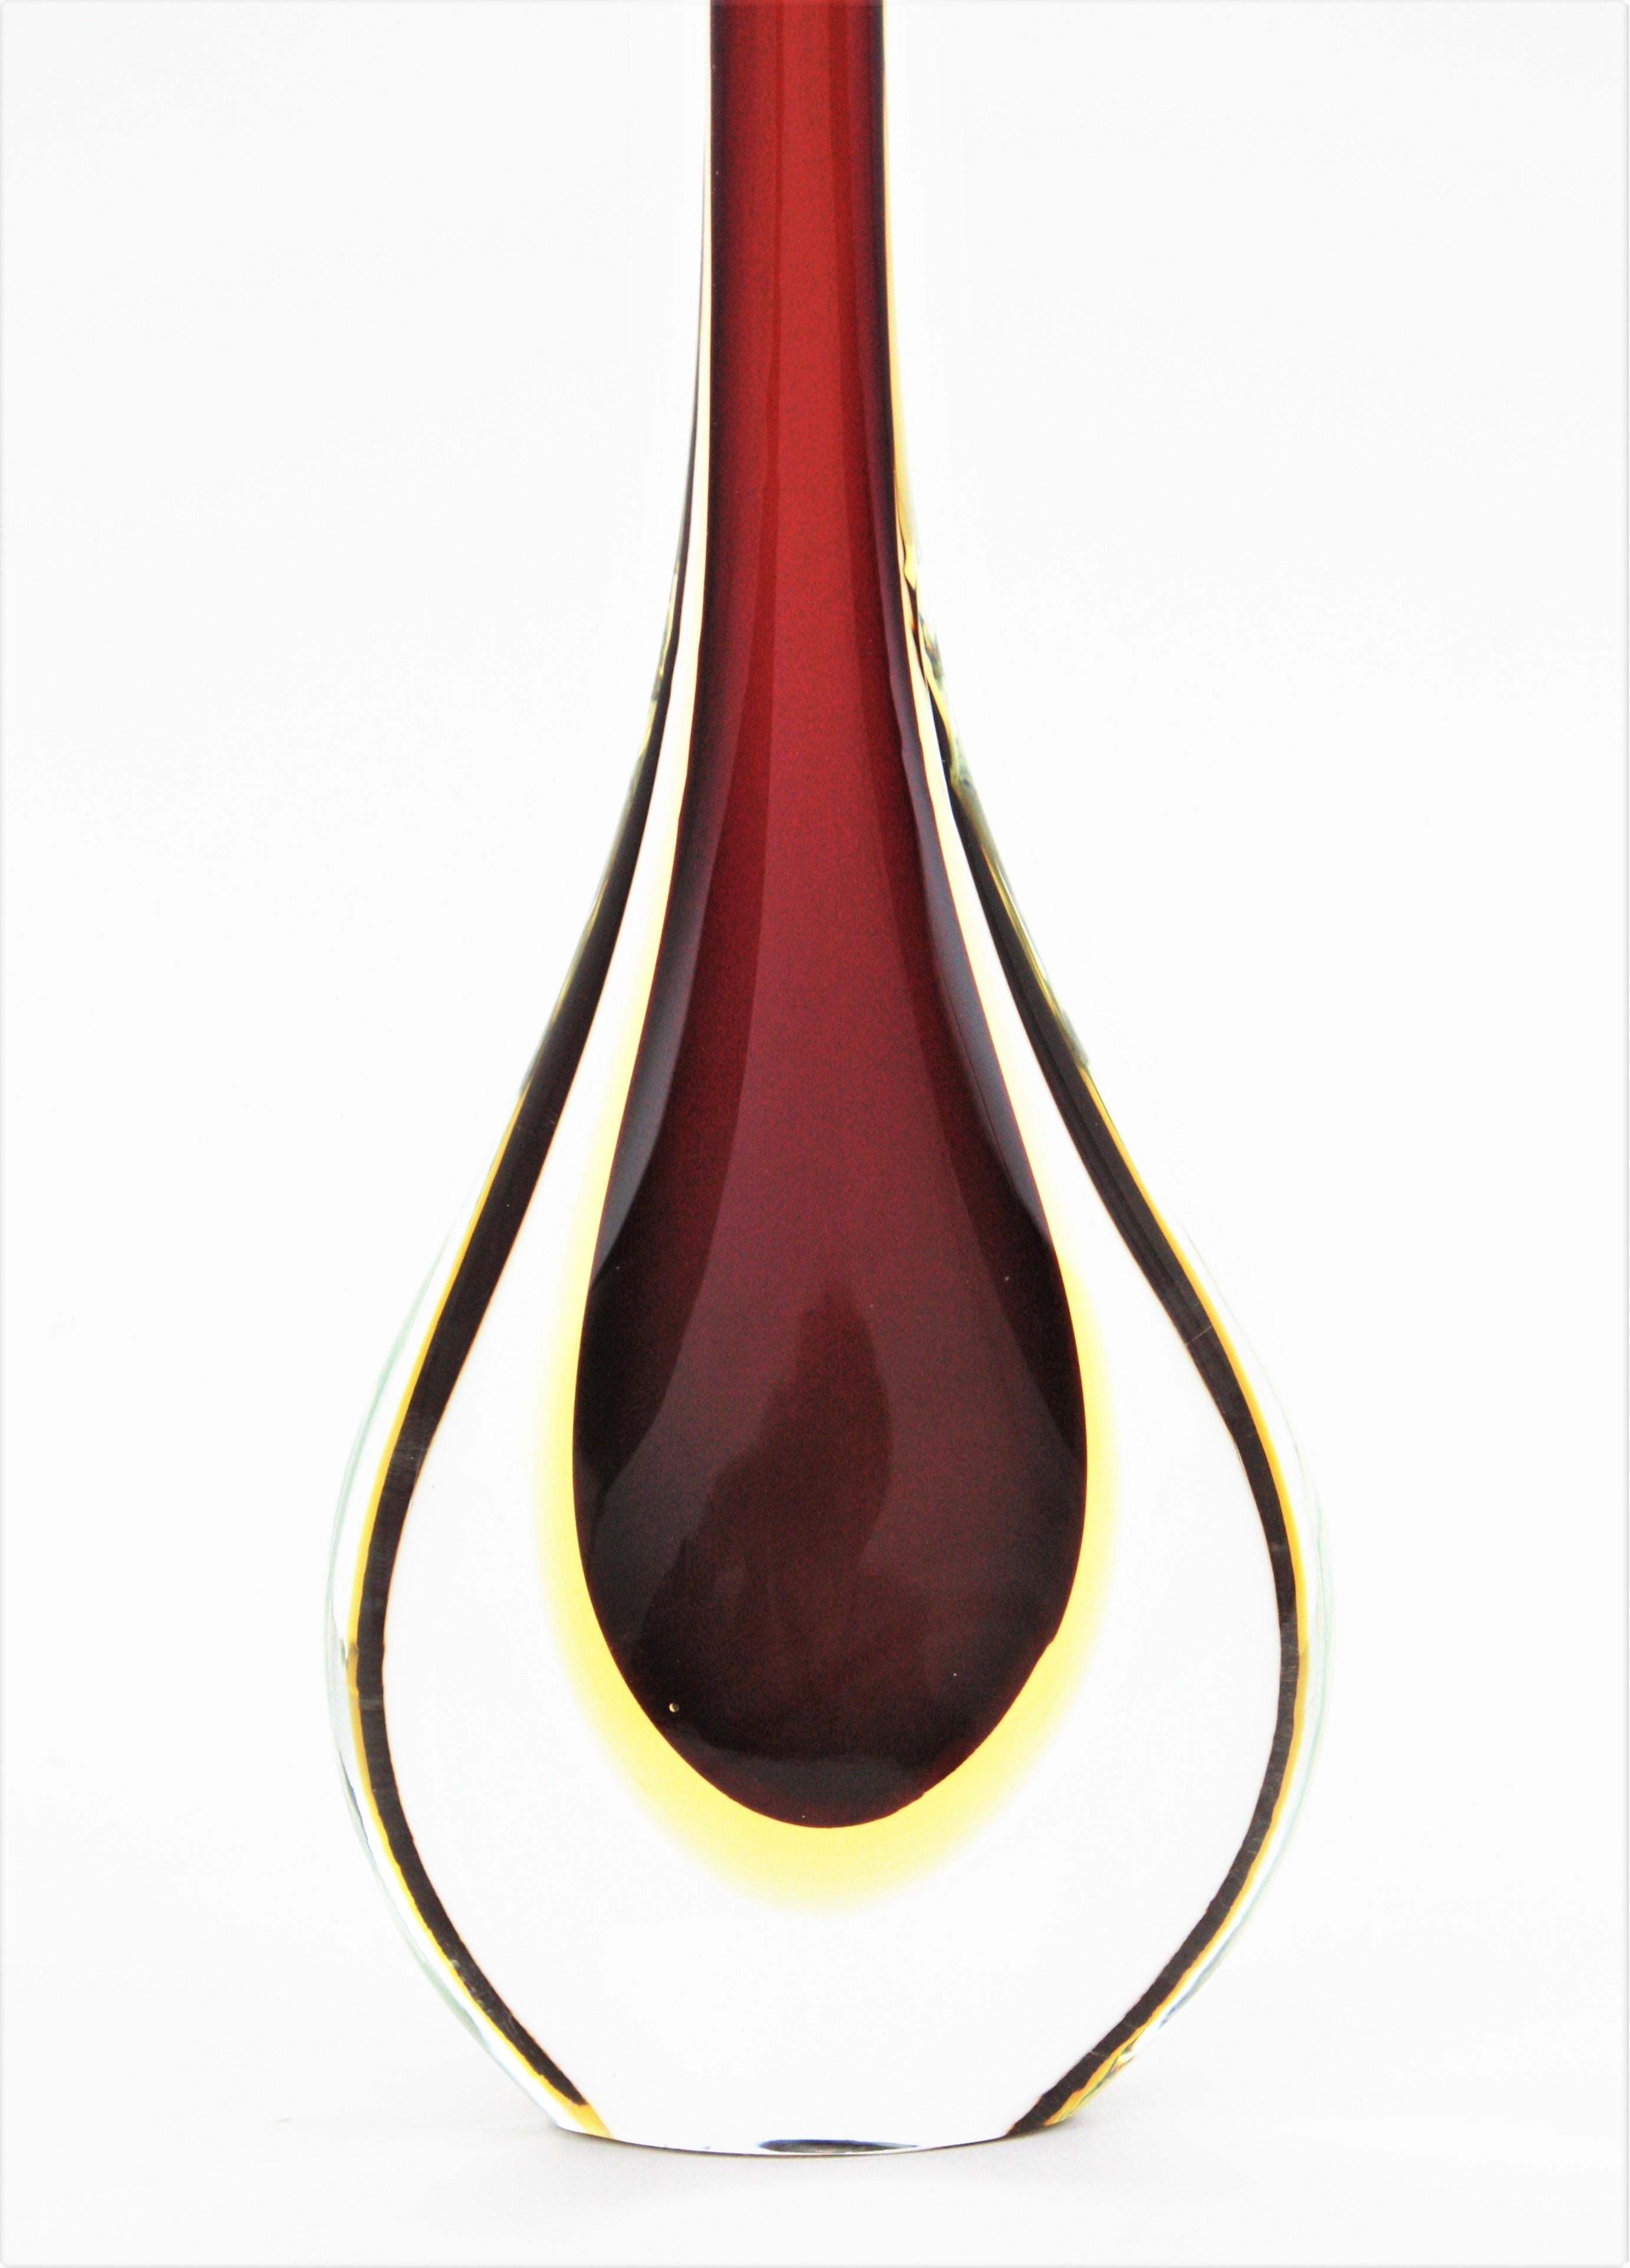 A wonderful Sommerso red and yellow hand blown Murano glass teardrop large vase. Designed by Flavio Poli and manufactured by Seguso Vetri d'Arte, Italy, 1950s.
Amazing teardrop shape with tall neck and eye-catching colors. Red glass submerged into